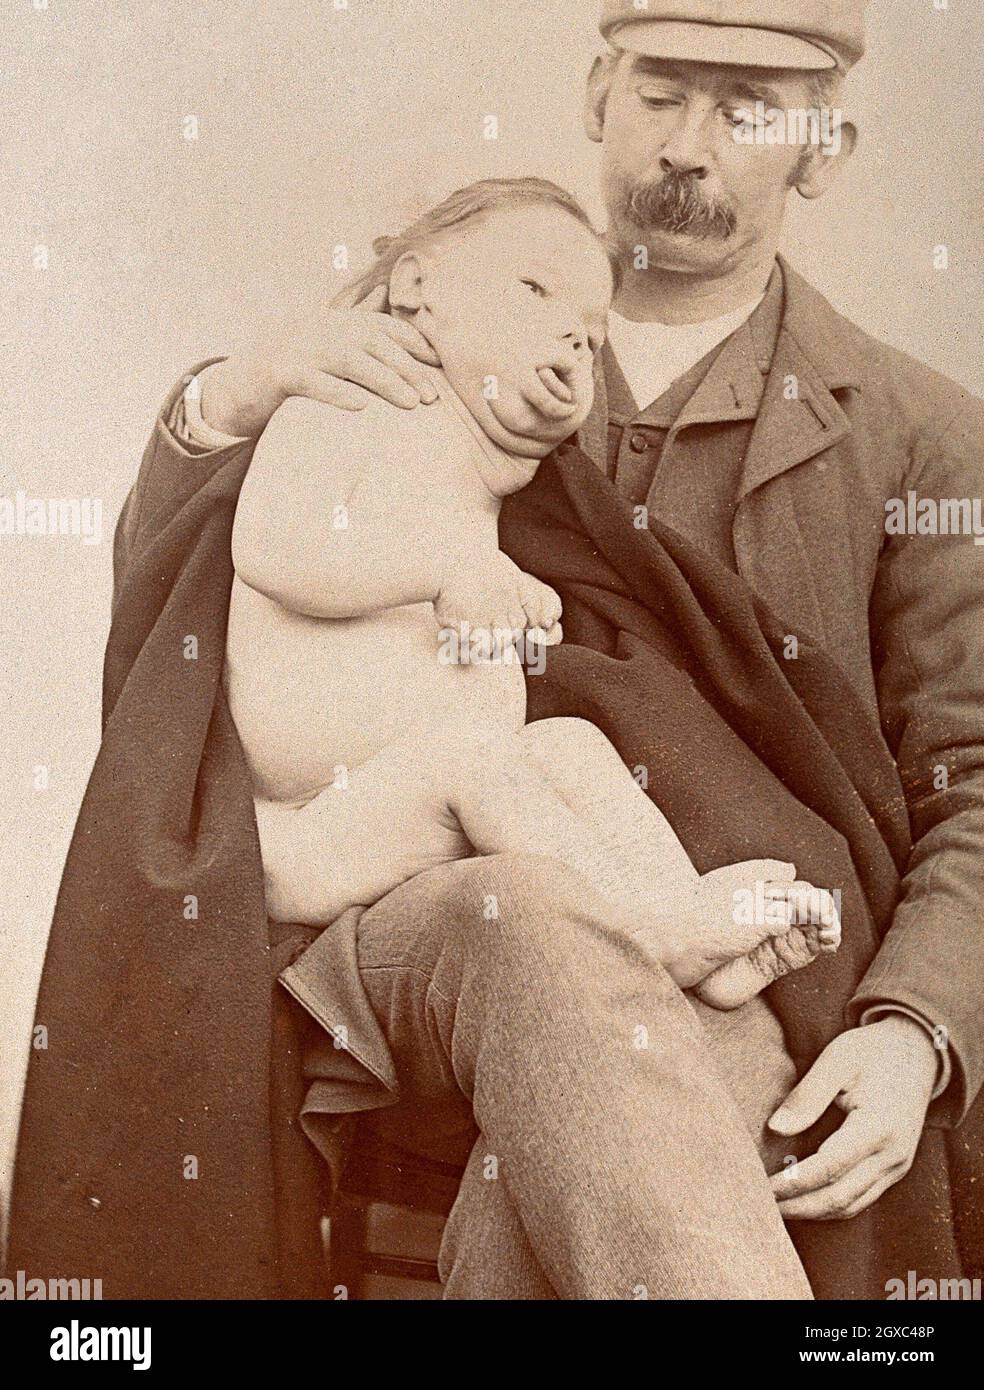 George Edward Shuttleworth holding a male child, showing signs of Down's syndrome, upon his lap. Photograph, 1895. - Contributors Shuttleworth, G. E. Stock Photo